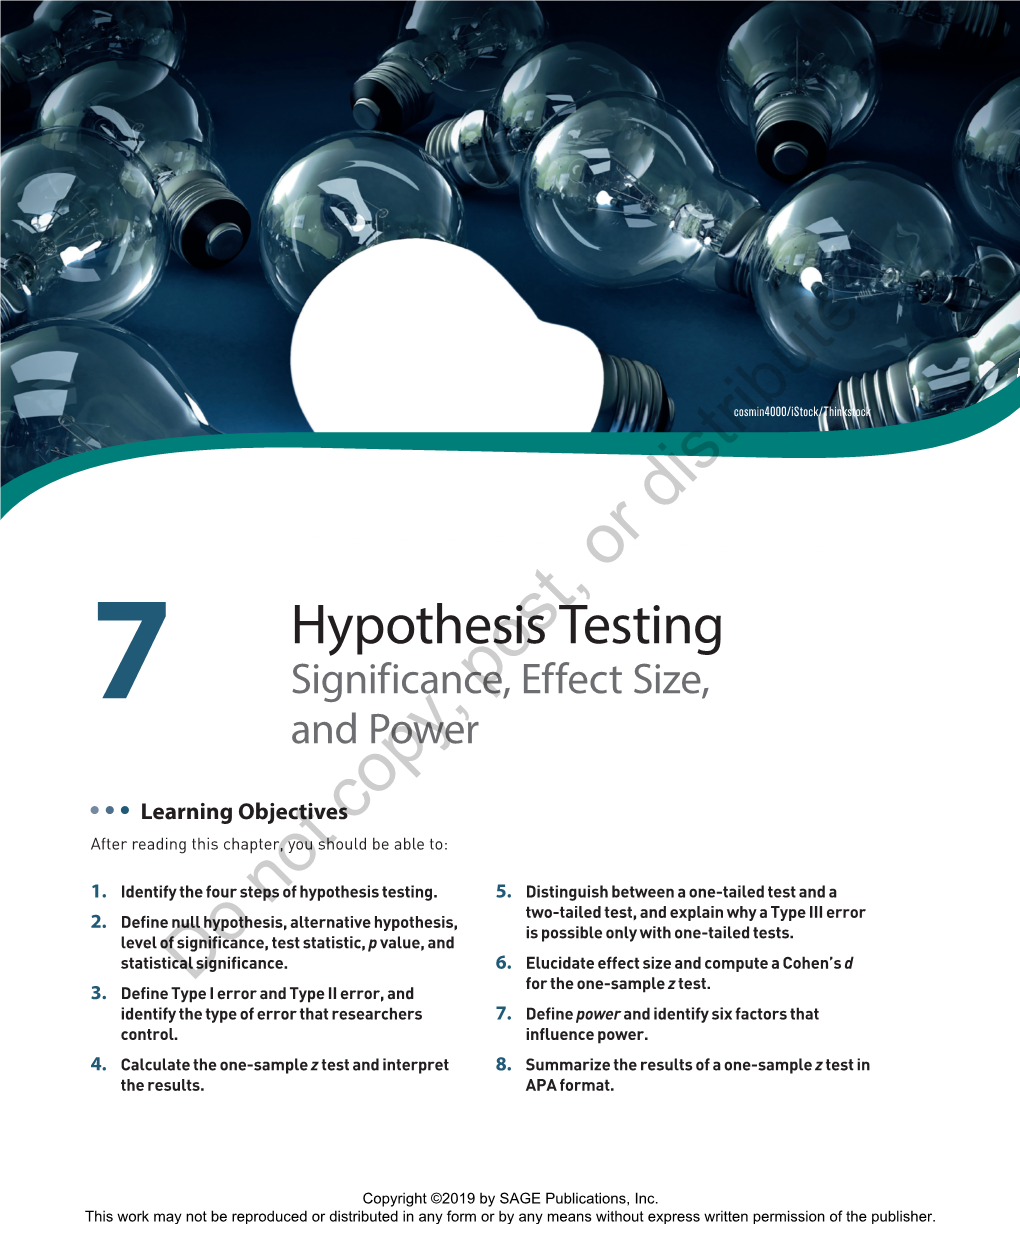 Chapter 7- Hypothesis Testing